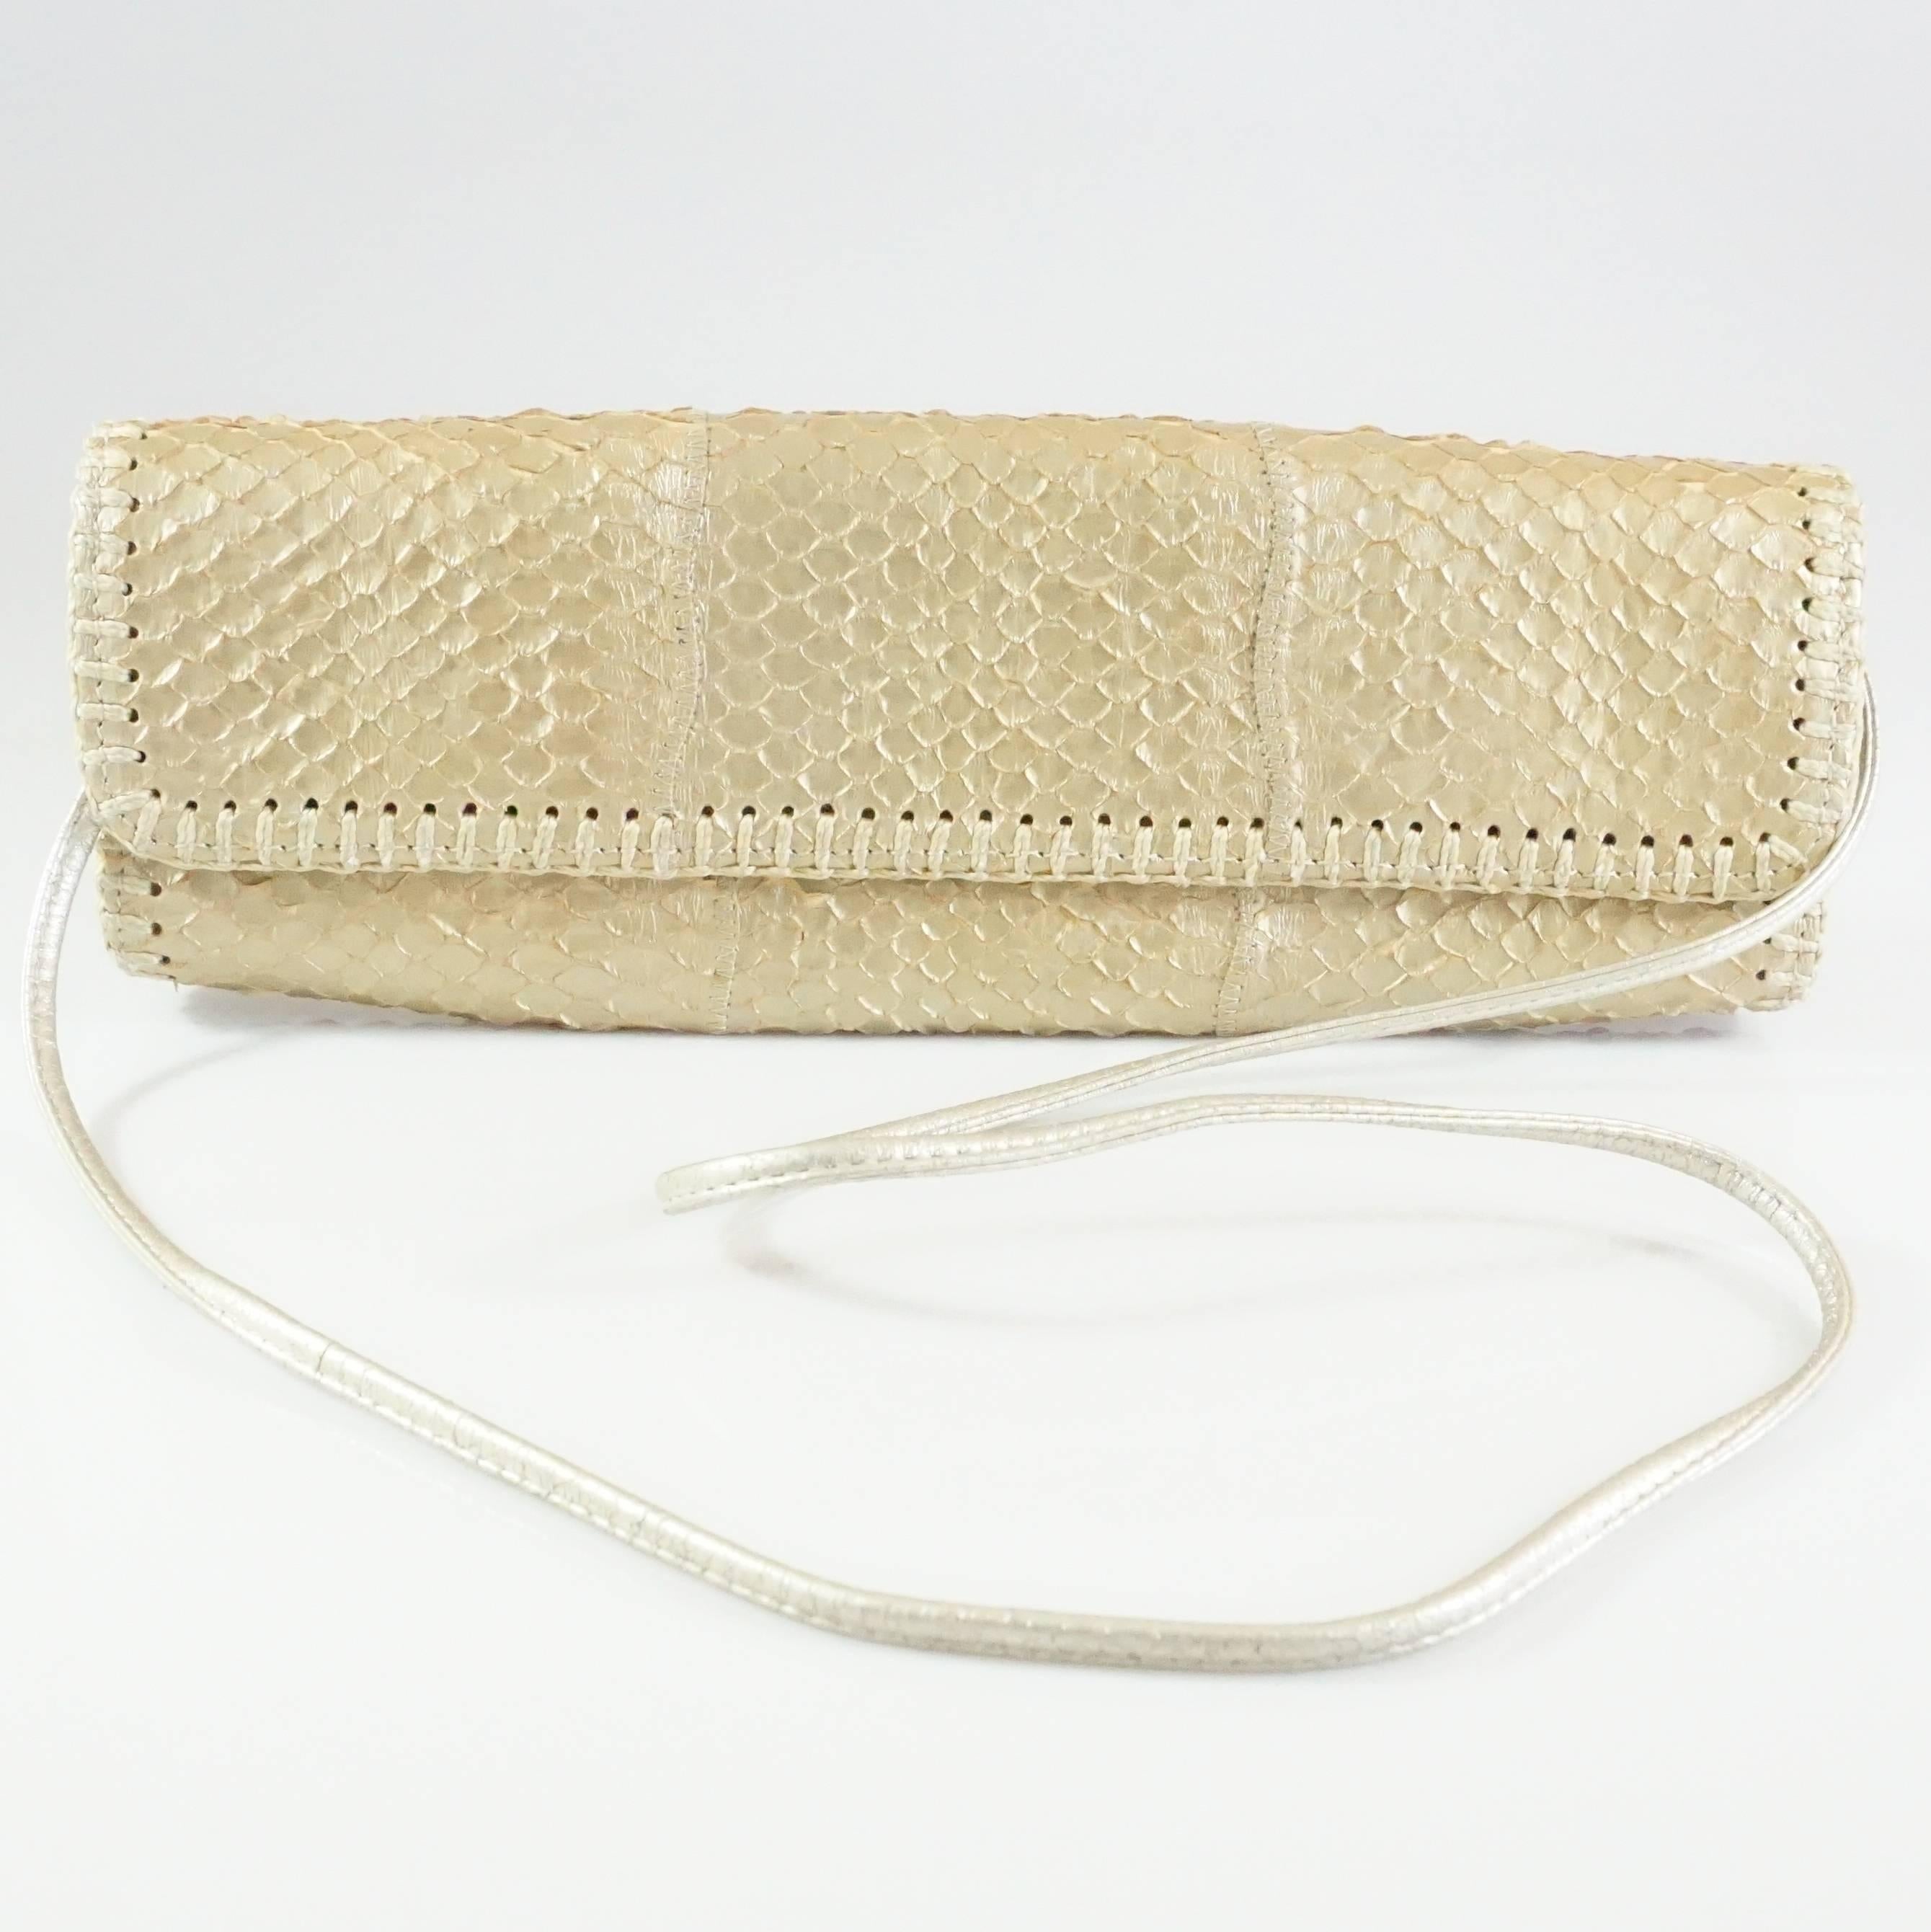 Carlos Falchi Gold Snake Clutch with Strap and Woven Detail. This gorgeous bag has a fold over style with a printed satin & leather lining. It comes with a longer strap and features a woven trim all around. It is in excellent condition with slight